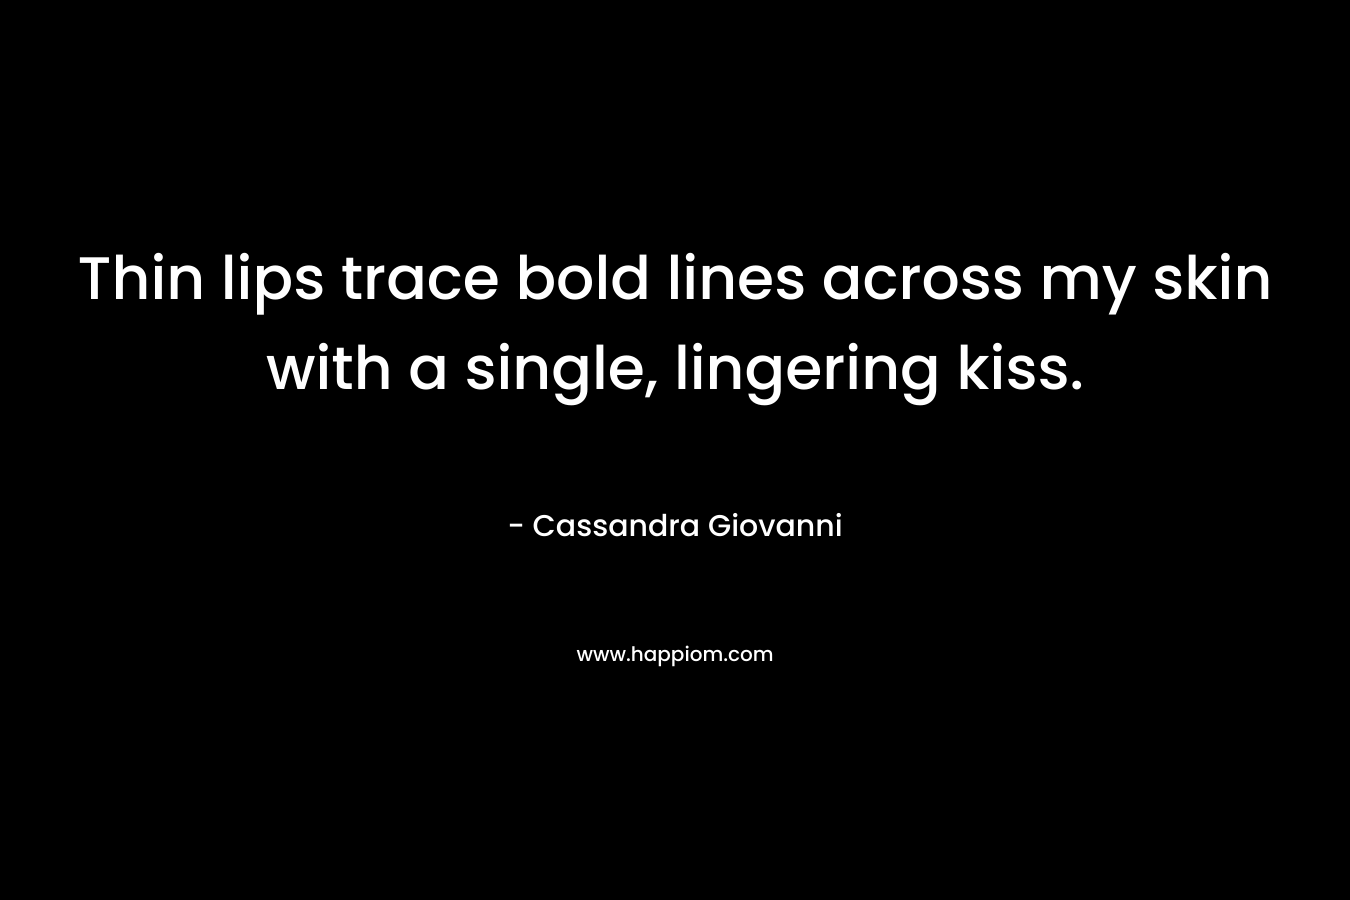 Thin lips trace bold lines across my skin with a single, lingering kiss.